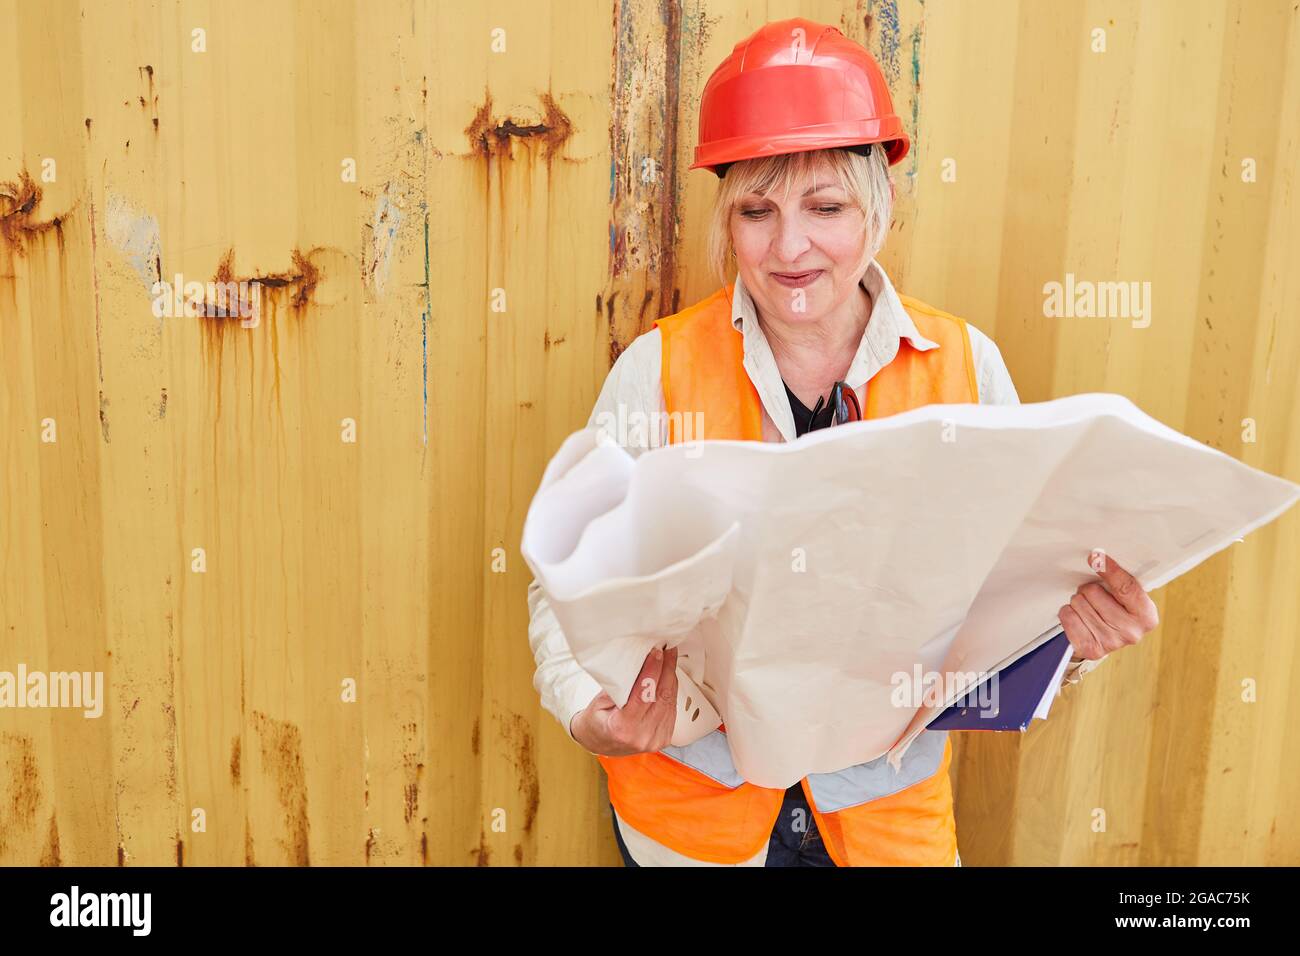 Woman as a construction worker or architect with a red hard hat looks at construction drawing for house construction Stock Photo